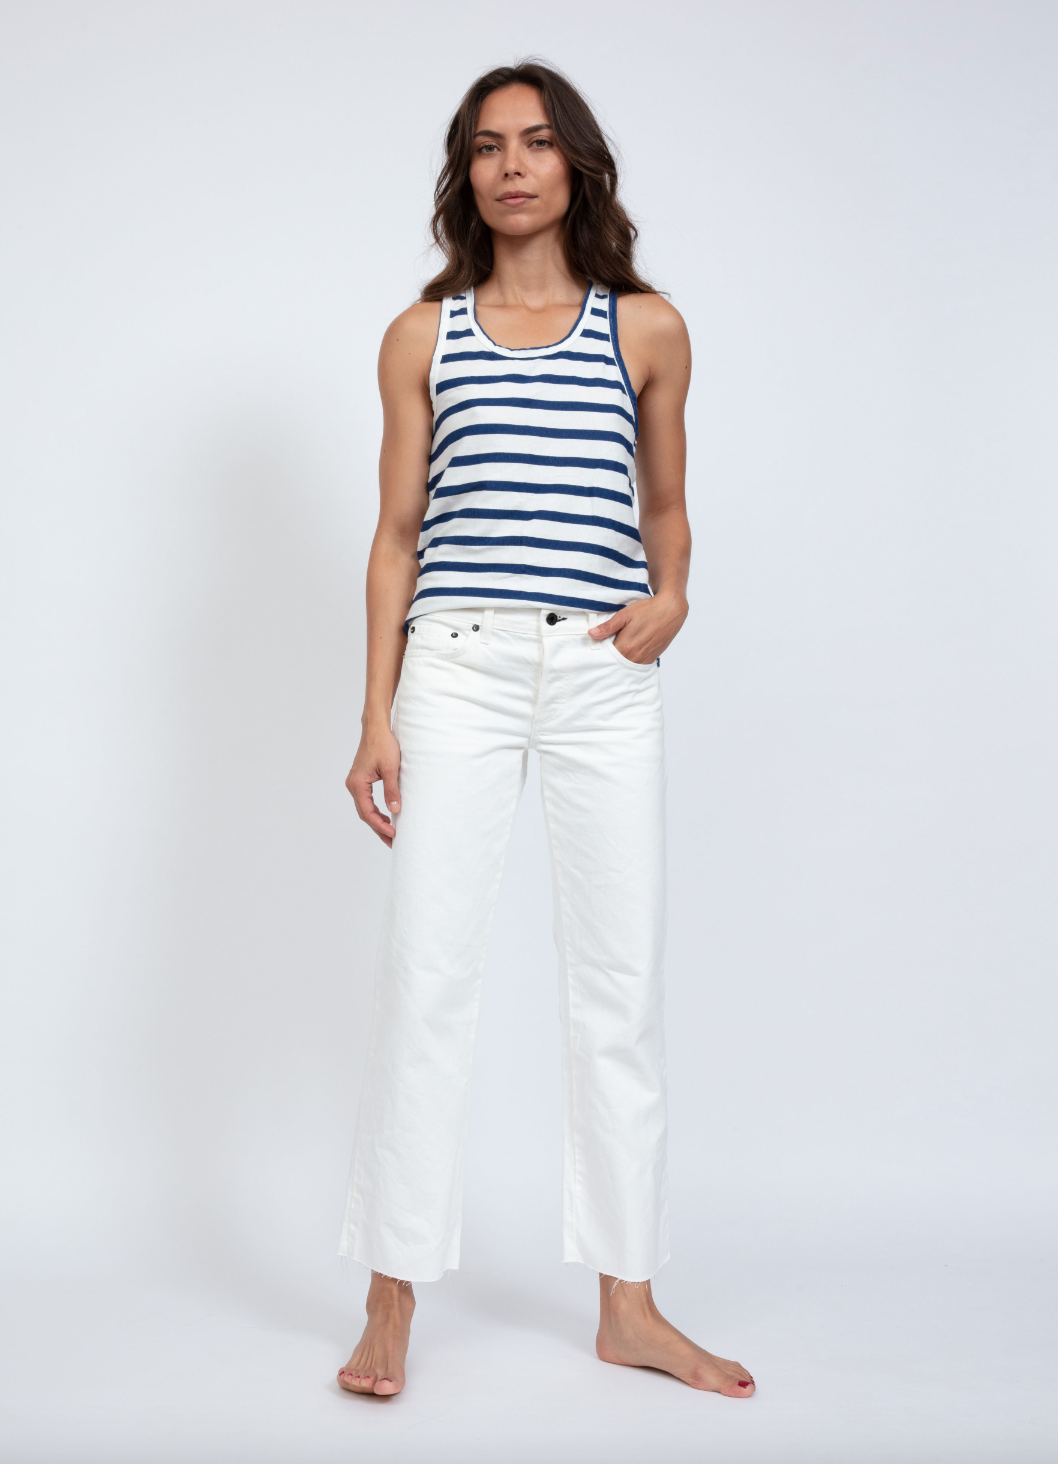 A woman stands confidently in a studio in Scottsdale, Arizona, wearing an ASKK striped tank top and white jeans, hands slightly tucked into pockets, on a plain background.